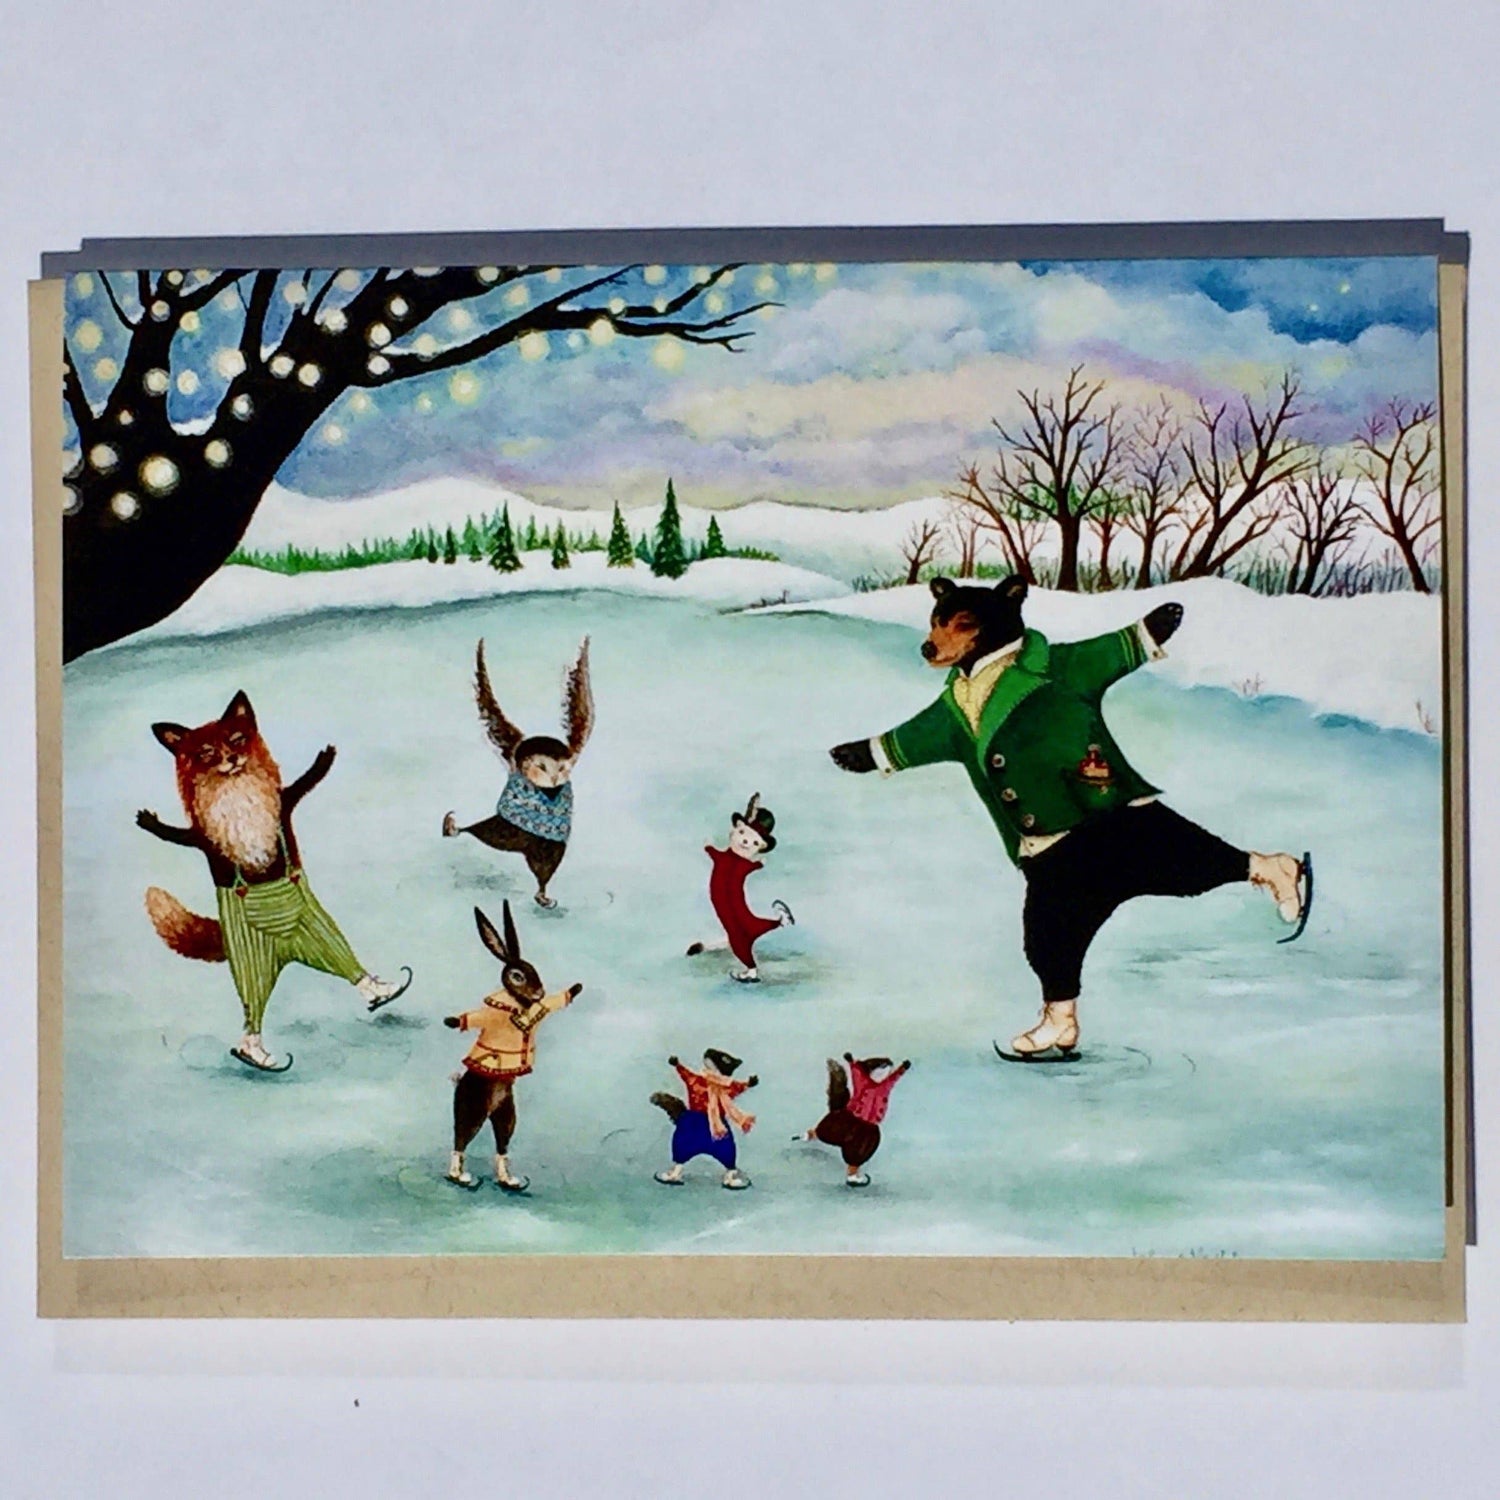 70% OFF A Wondrous Whirl - Blank Holiday Card